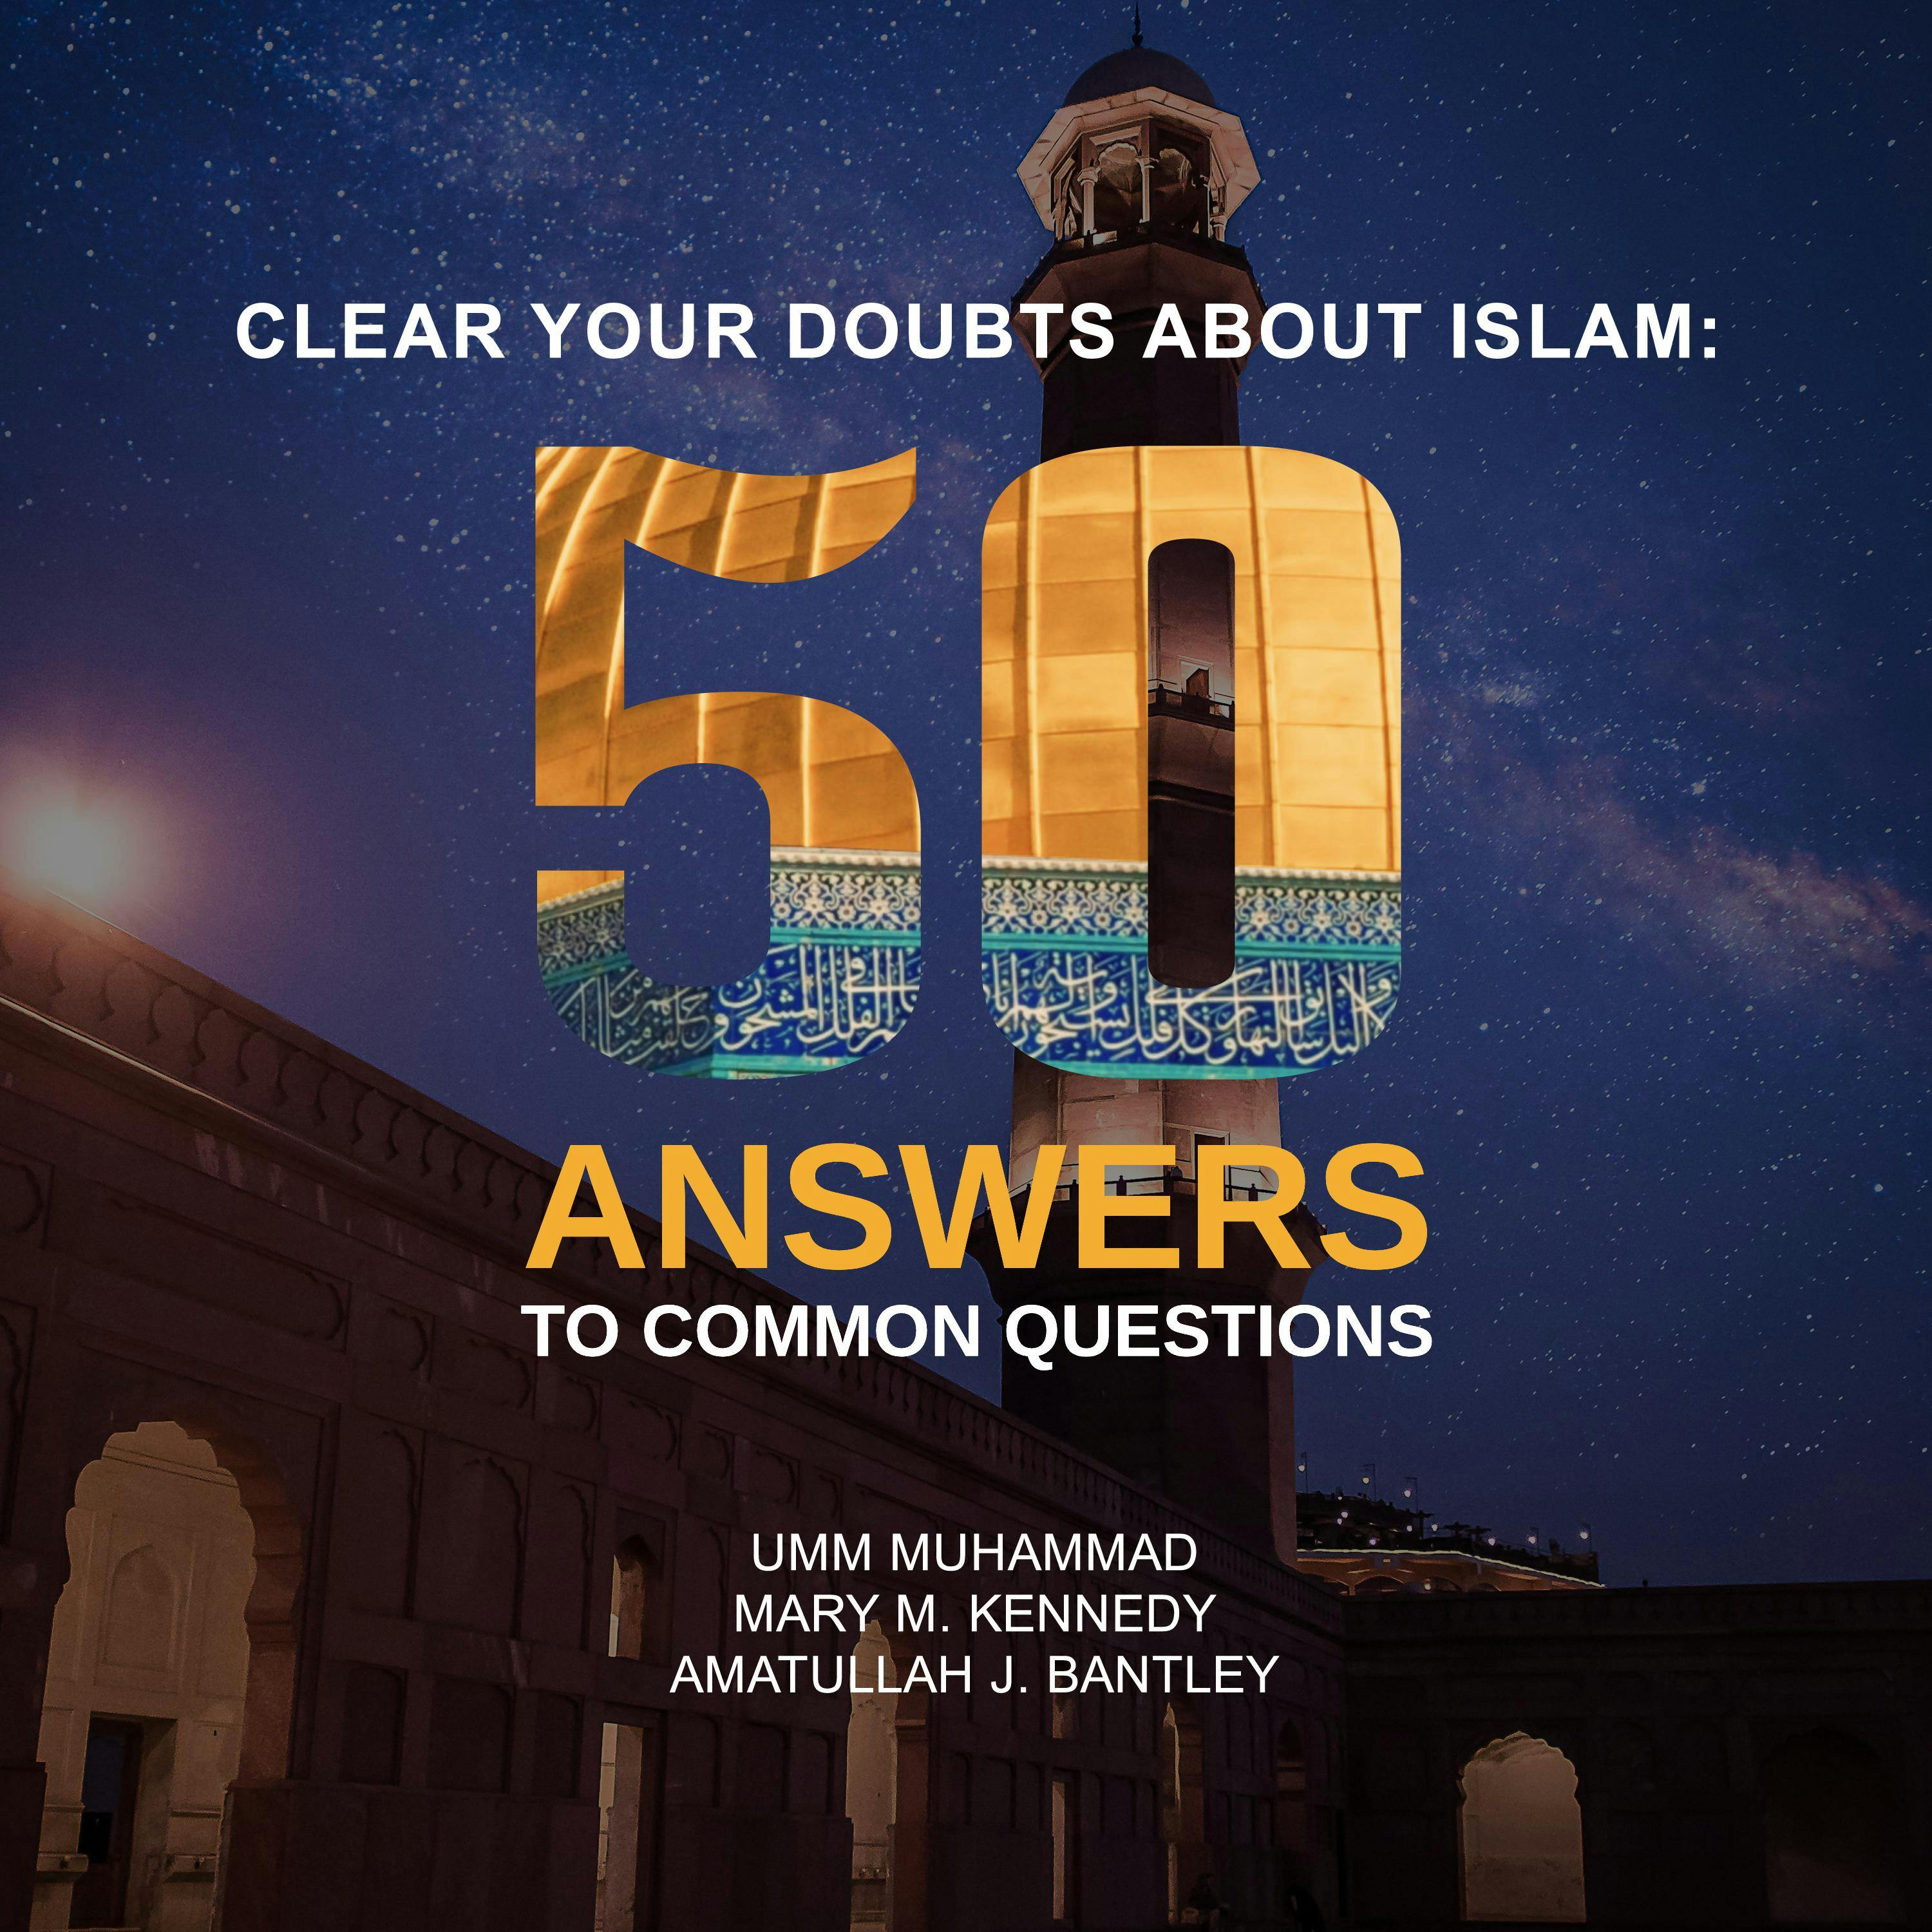 Clear Your Doubts About Islam: 50 Answers to Common Questions - Mary M. Kennedy, Amatullah J. Bantley, Umm Muhammad